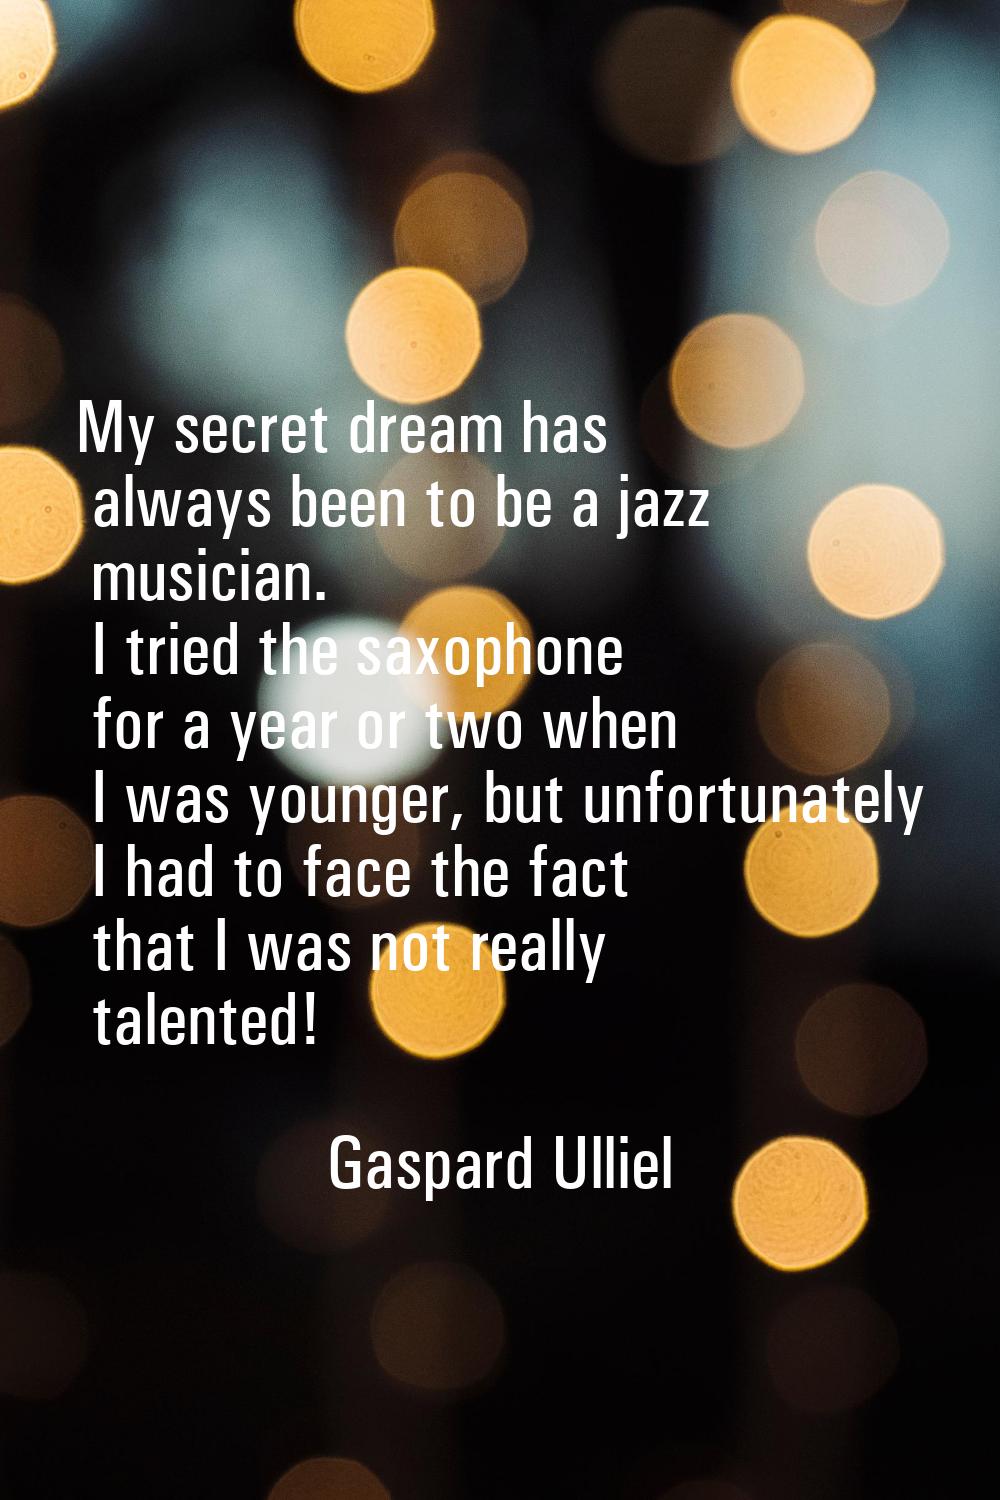 My secret dream has always been to be a jazz musician. I tried the saxophone for a year or two when